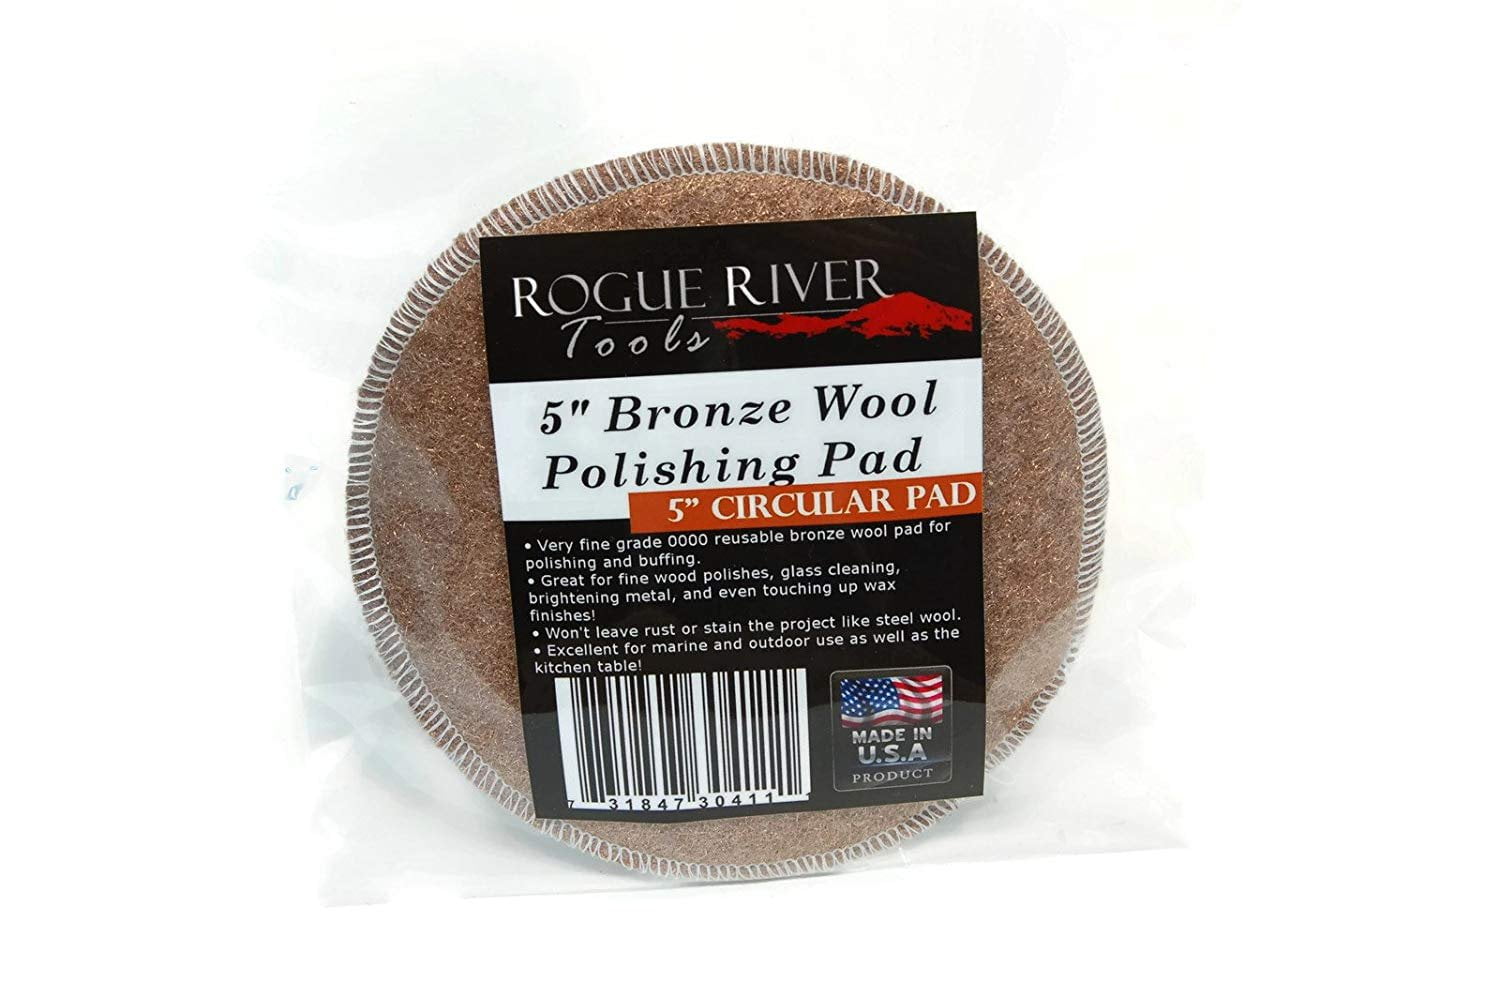 1pc Rogue River Tools 5" Tile/Glass Cleaning Bronze Wool Polishing Pad 